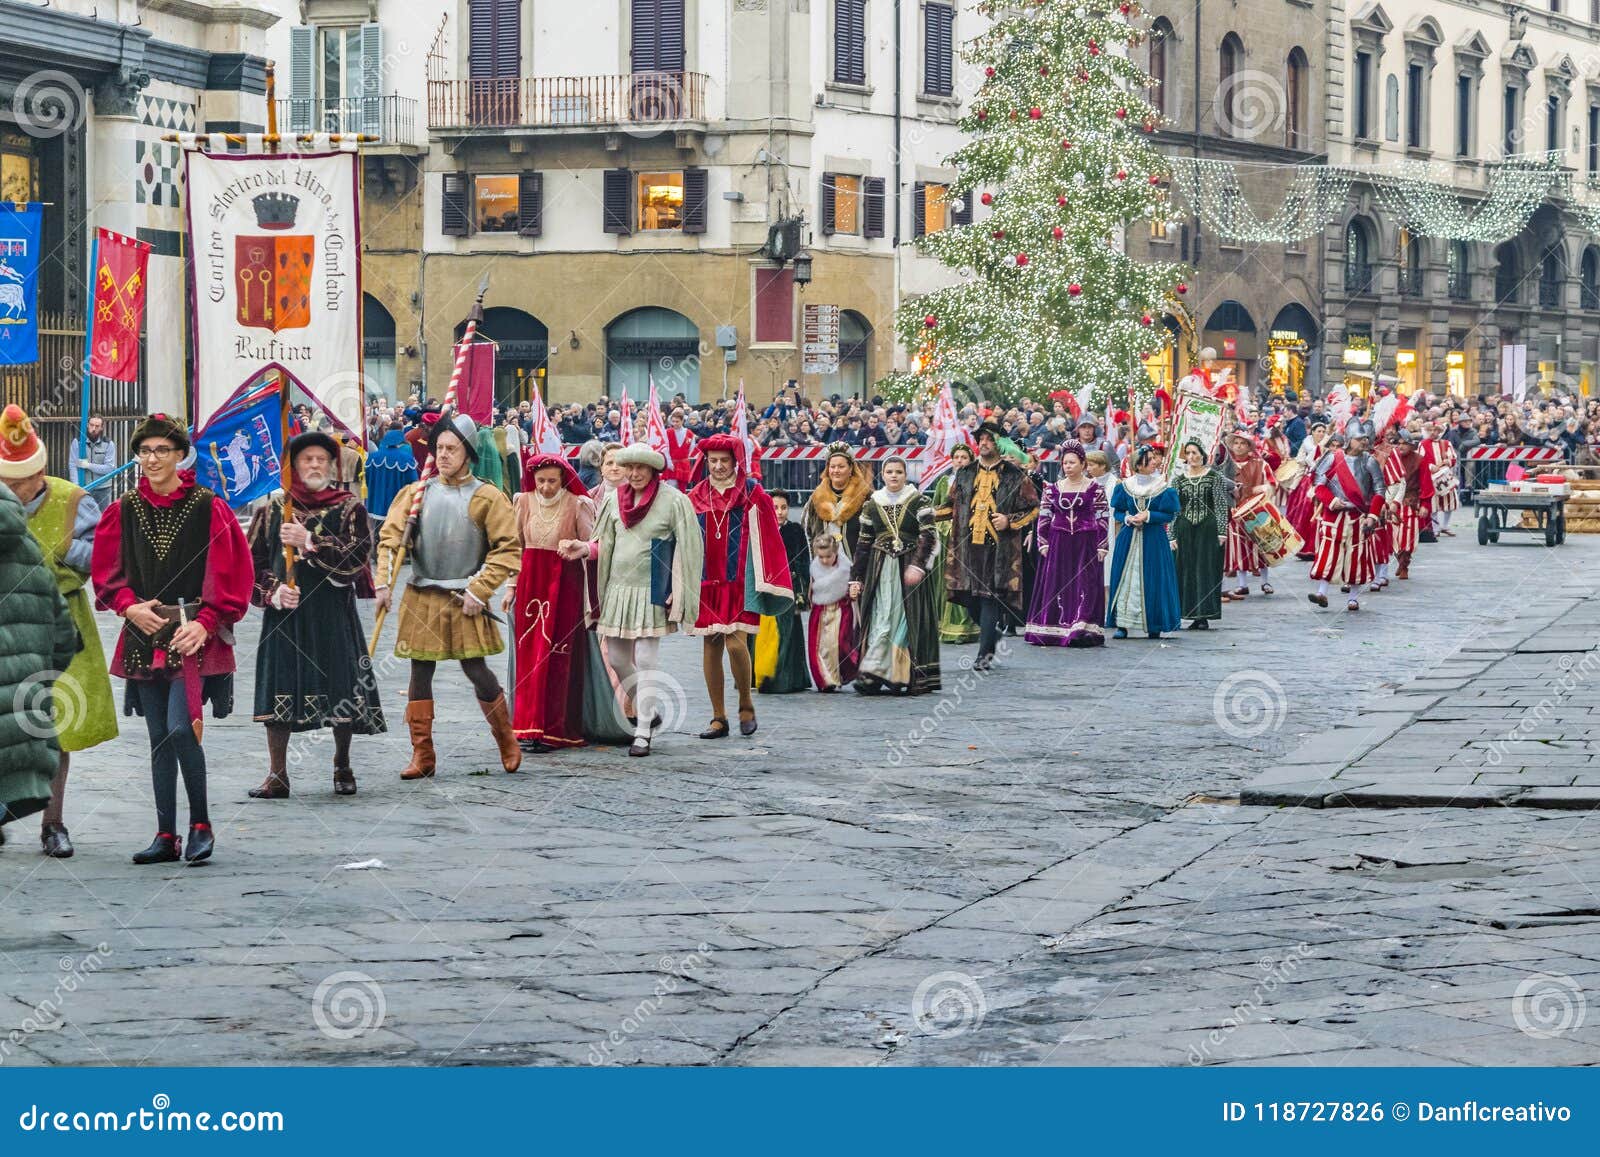 January 6 Traditional Celebration at Florence, Italy Editorial Photo